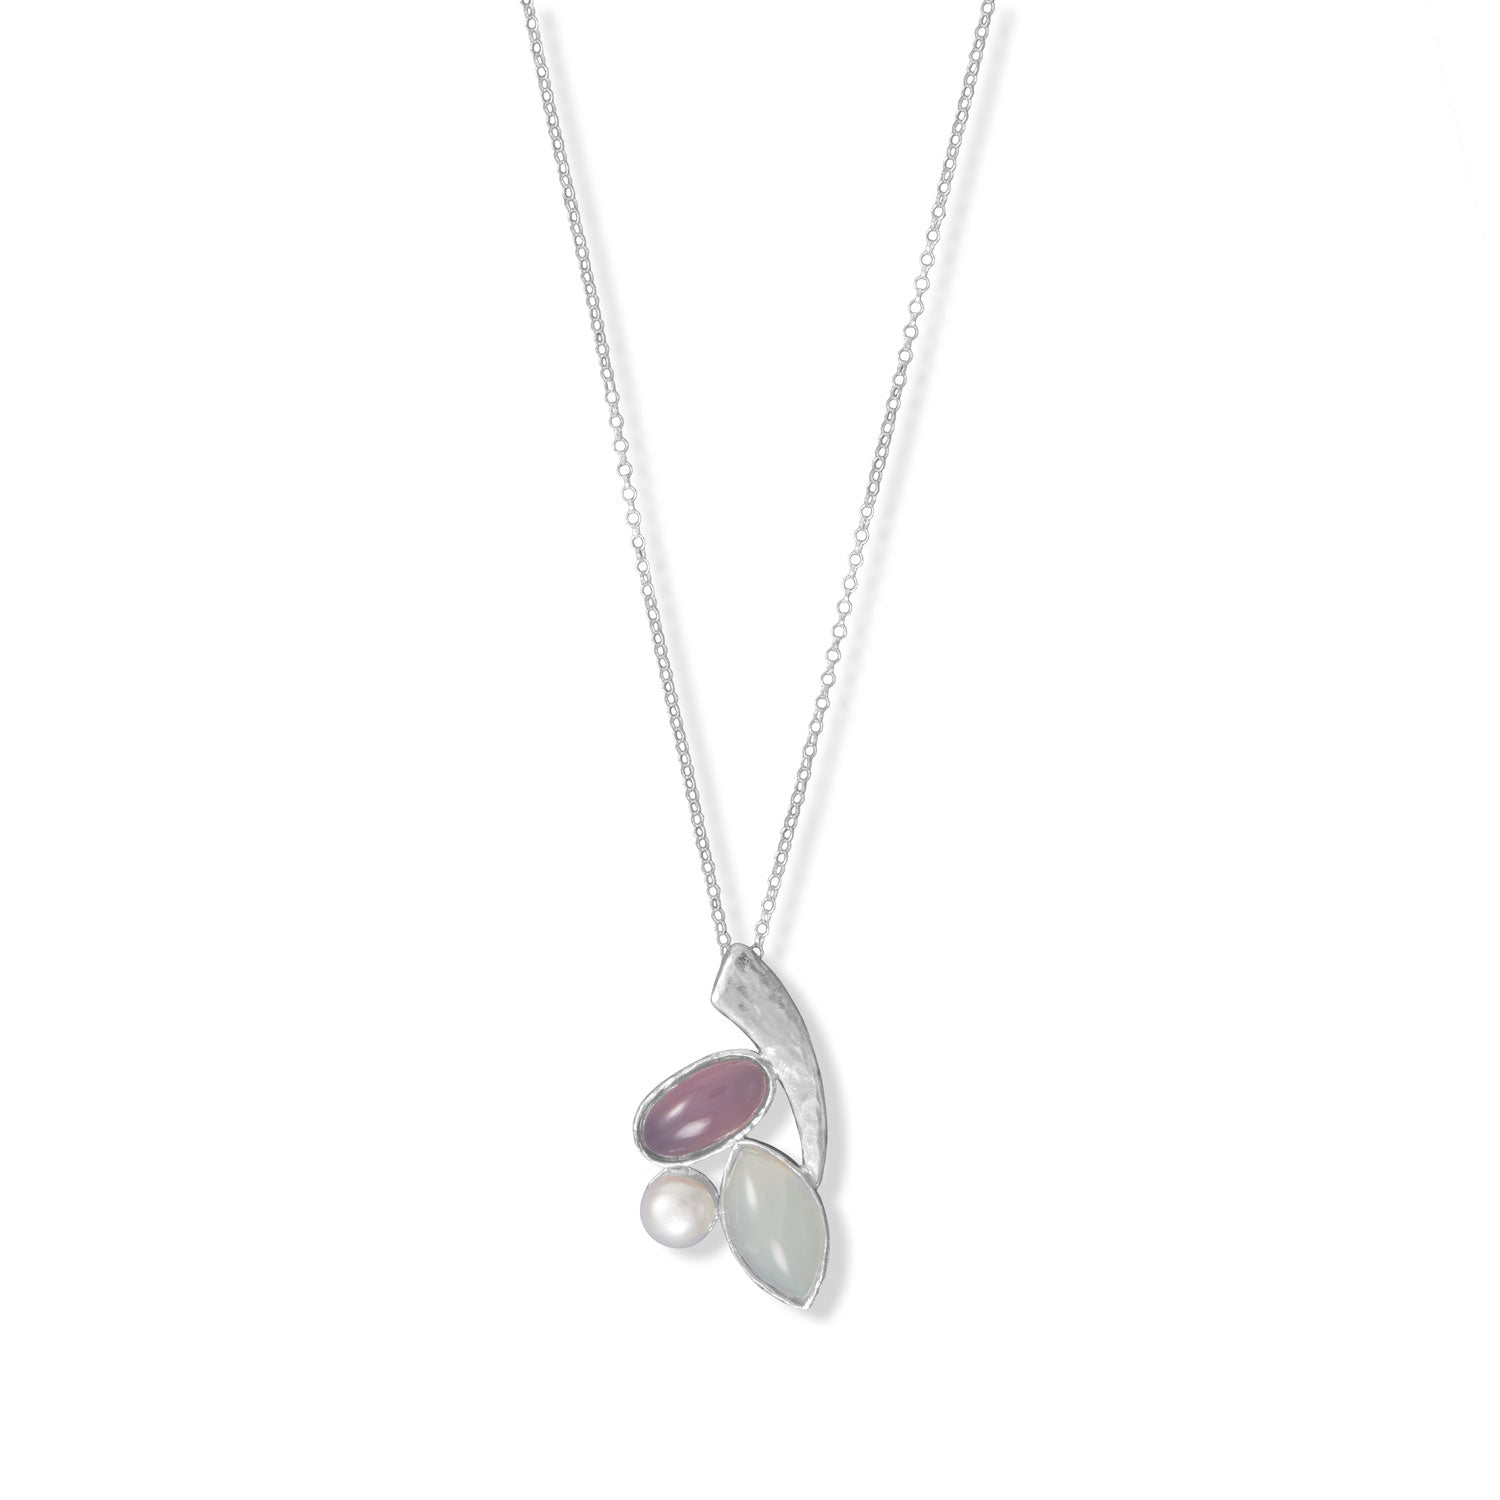 18" Rainbow Moonstone, Cultured Freshwater Pearl and Pink Chalcedony Necklace